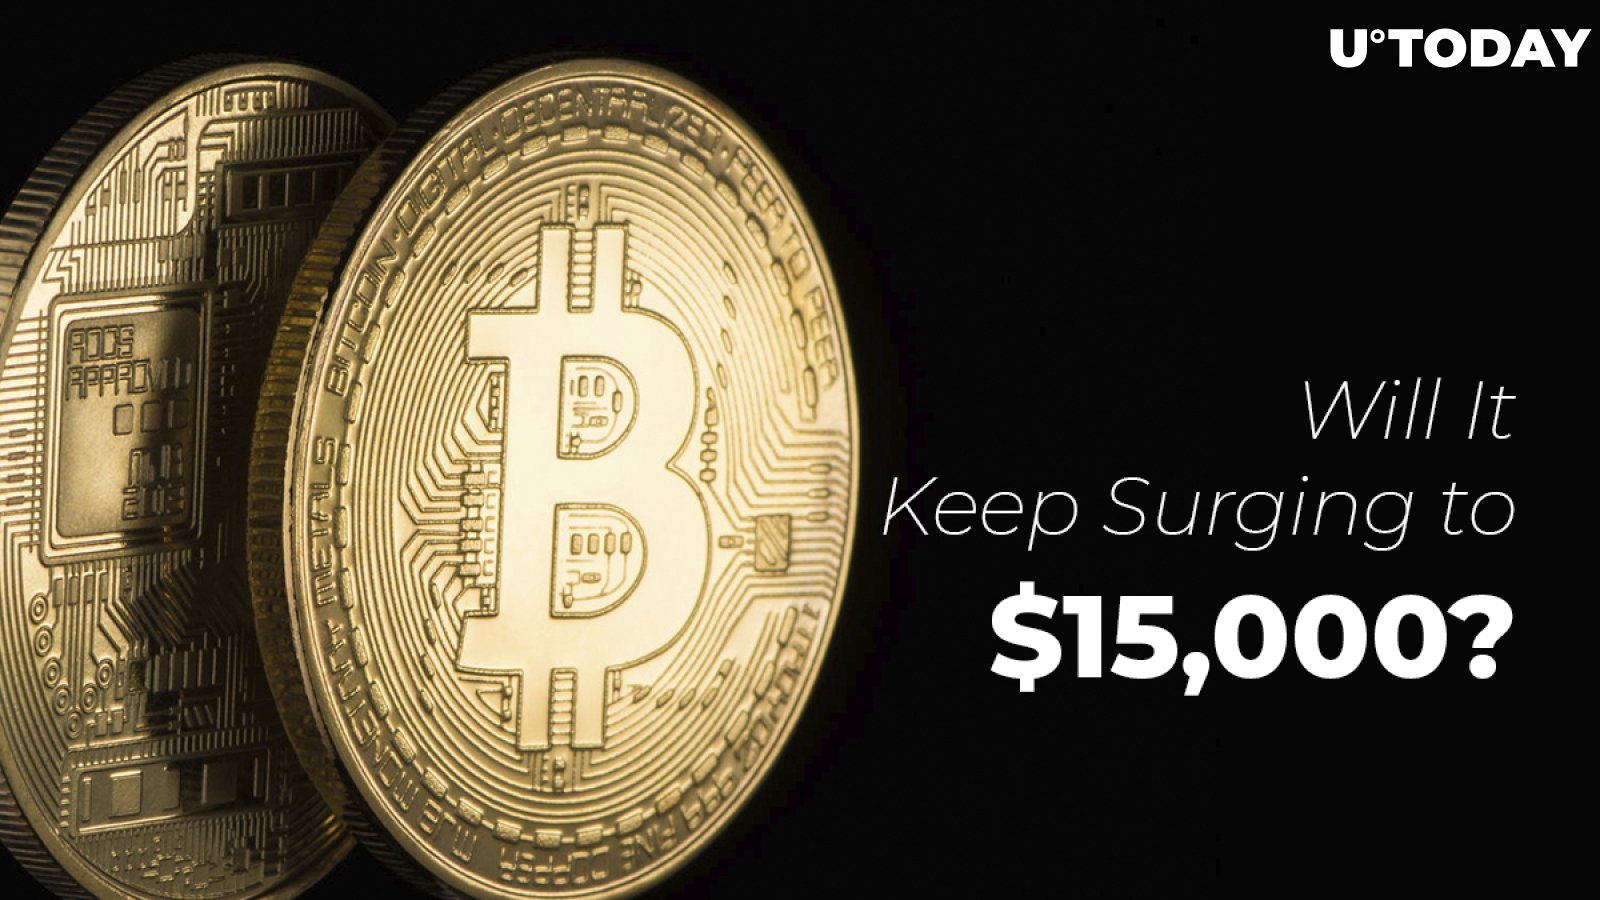 Bitcoin Price Reaches $10,700, All Eyes on BTC - Will It Keep Surging to $15,000?